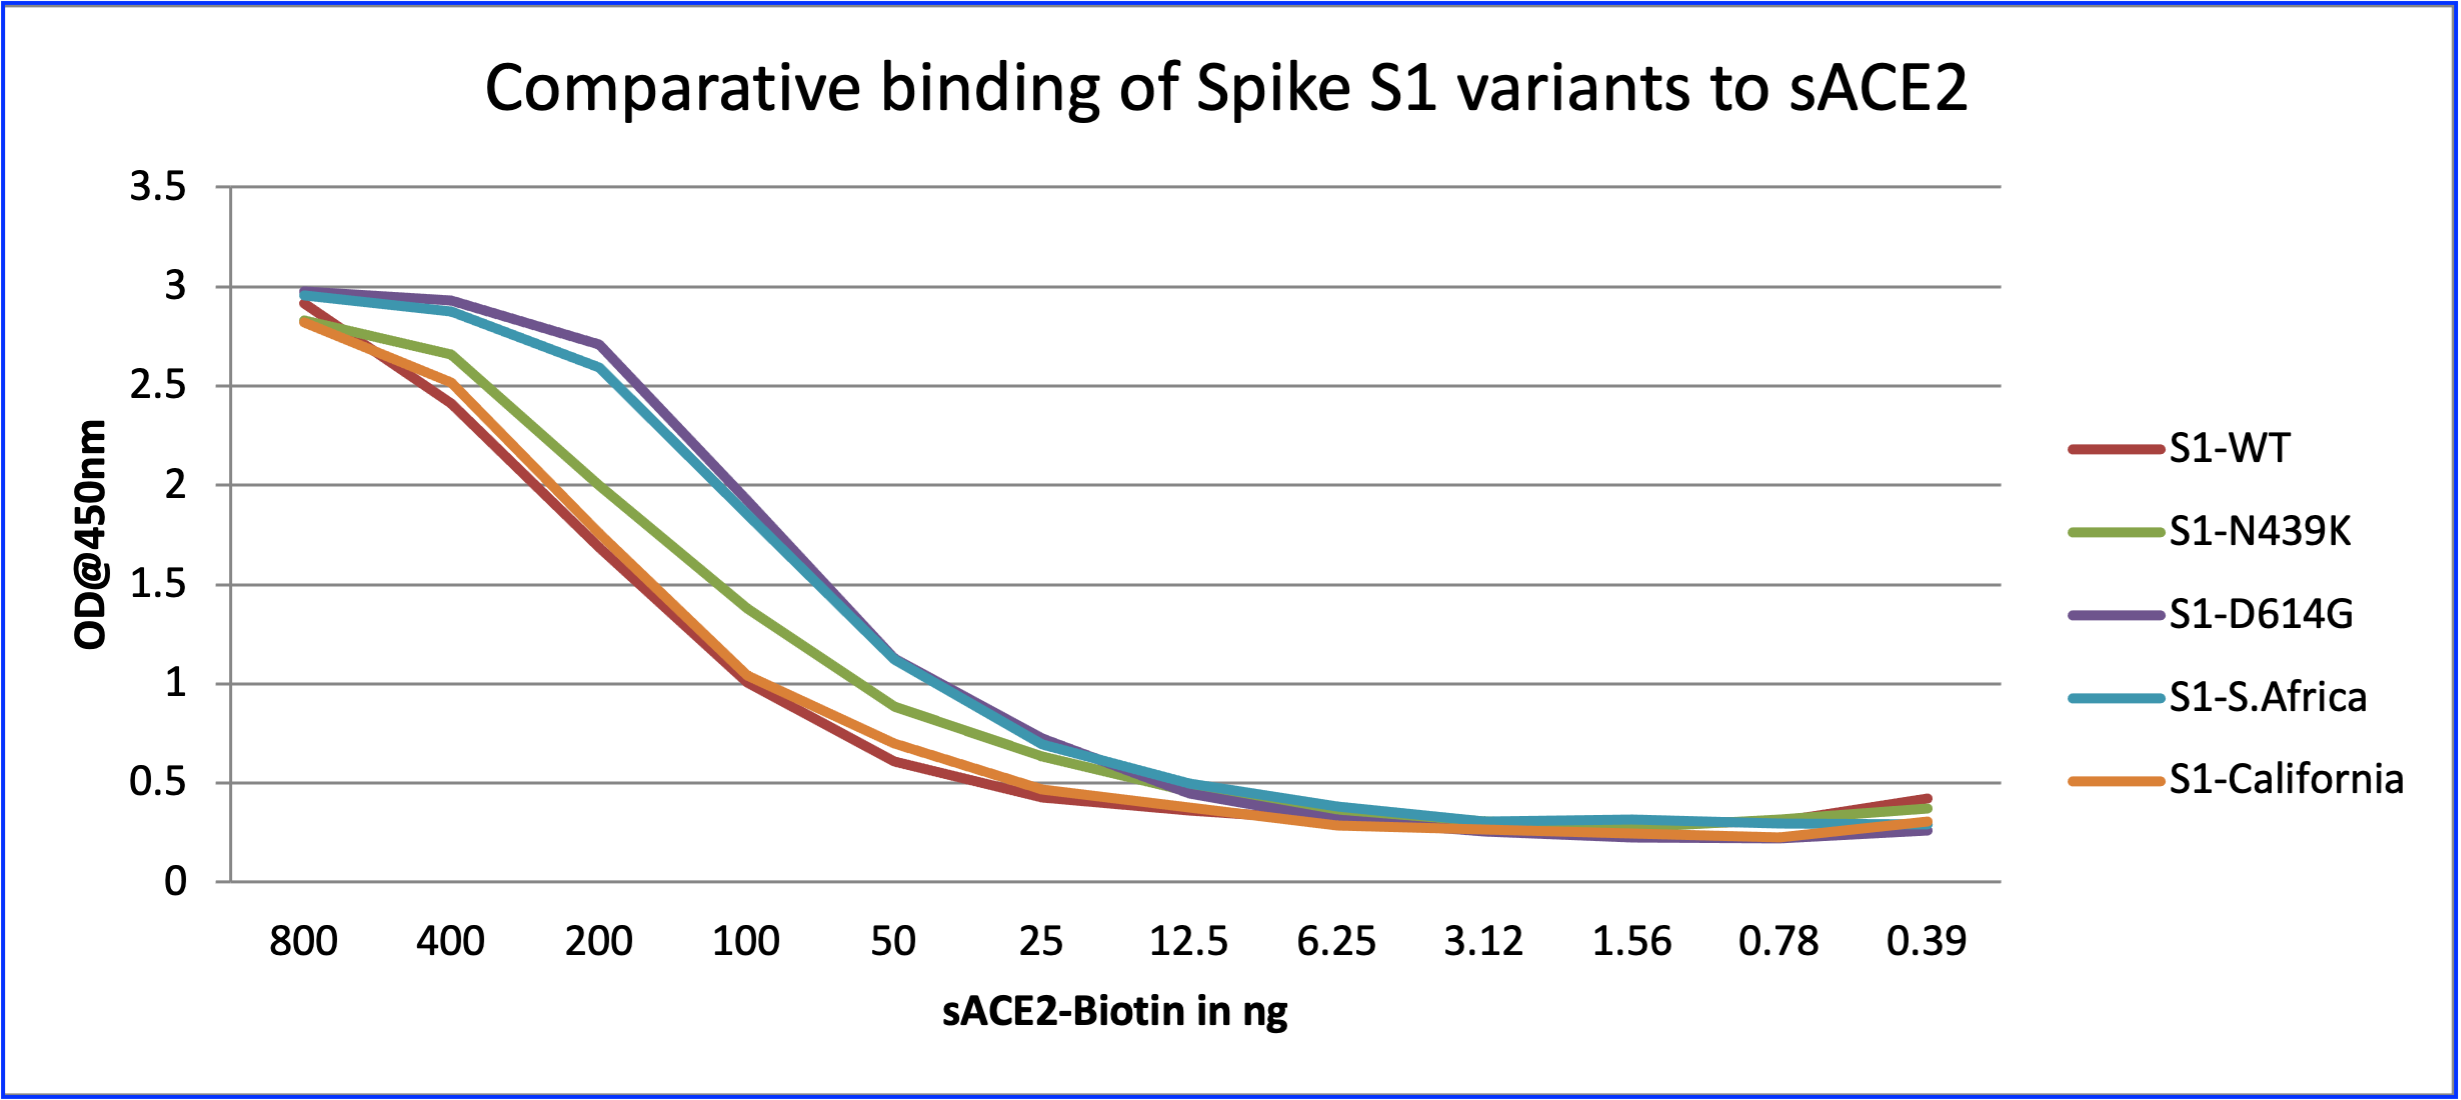 Figure-3: Comparative binding of Spike S1 variants to sACE2: Wells of a 96-well microtiter plate were coated with 100 ng in duplicates each of S1-WT (Cat# 21-1008), S1-N439K (Cat# 21-1012), S1-D614G (Cat# 21-1009), S1-South Africa (Cat# 21-1017), and S1-Southern California (Cat# 21-1018). Binding to sACE2 was determined by adding different concentrations of biotinylated-sACE2 (Cat# 21-1006).